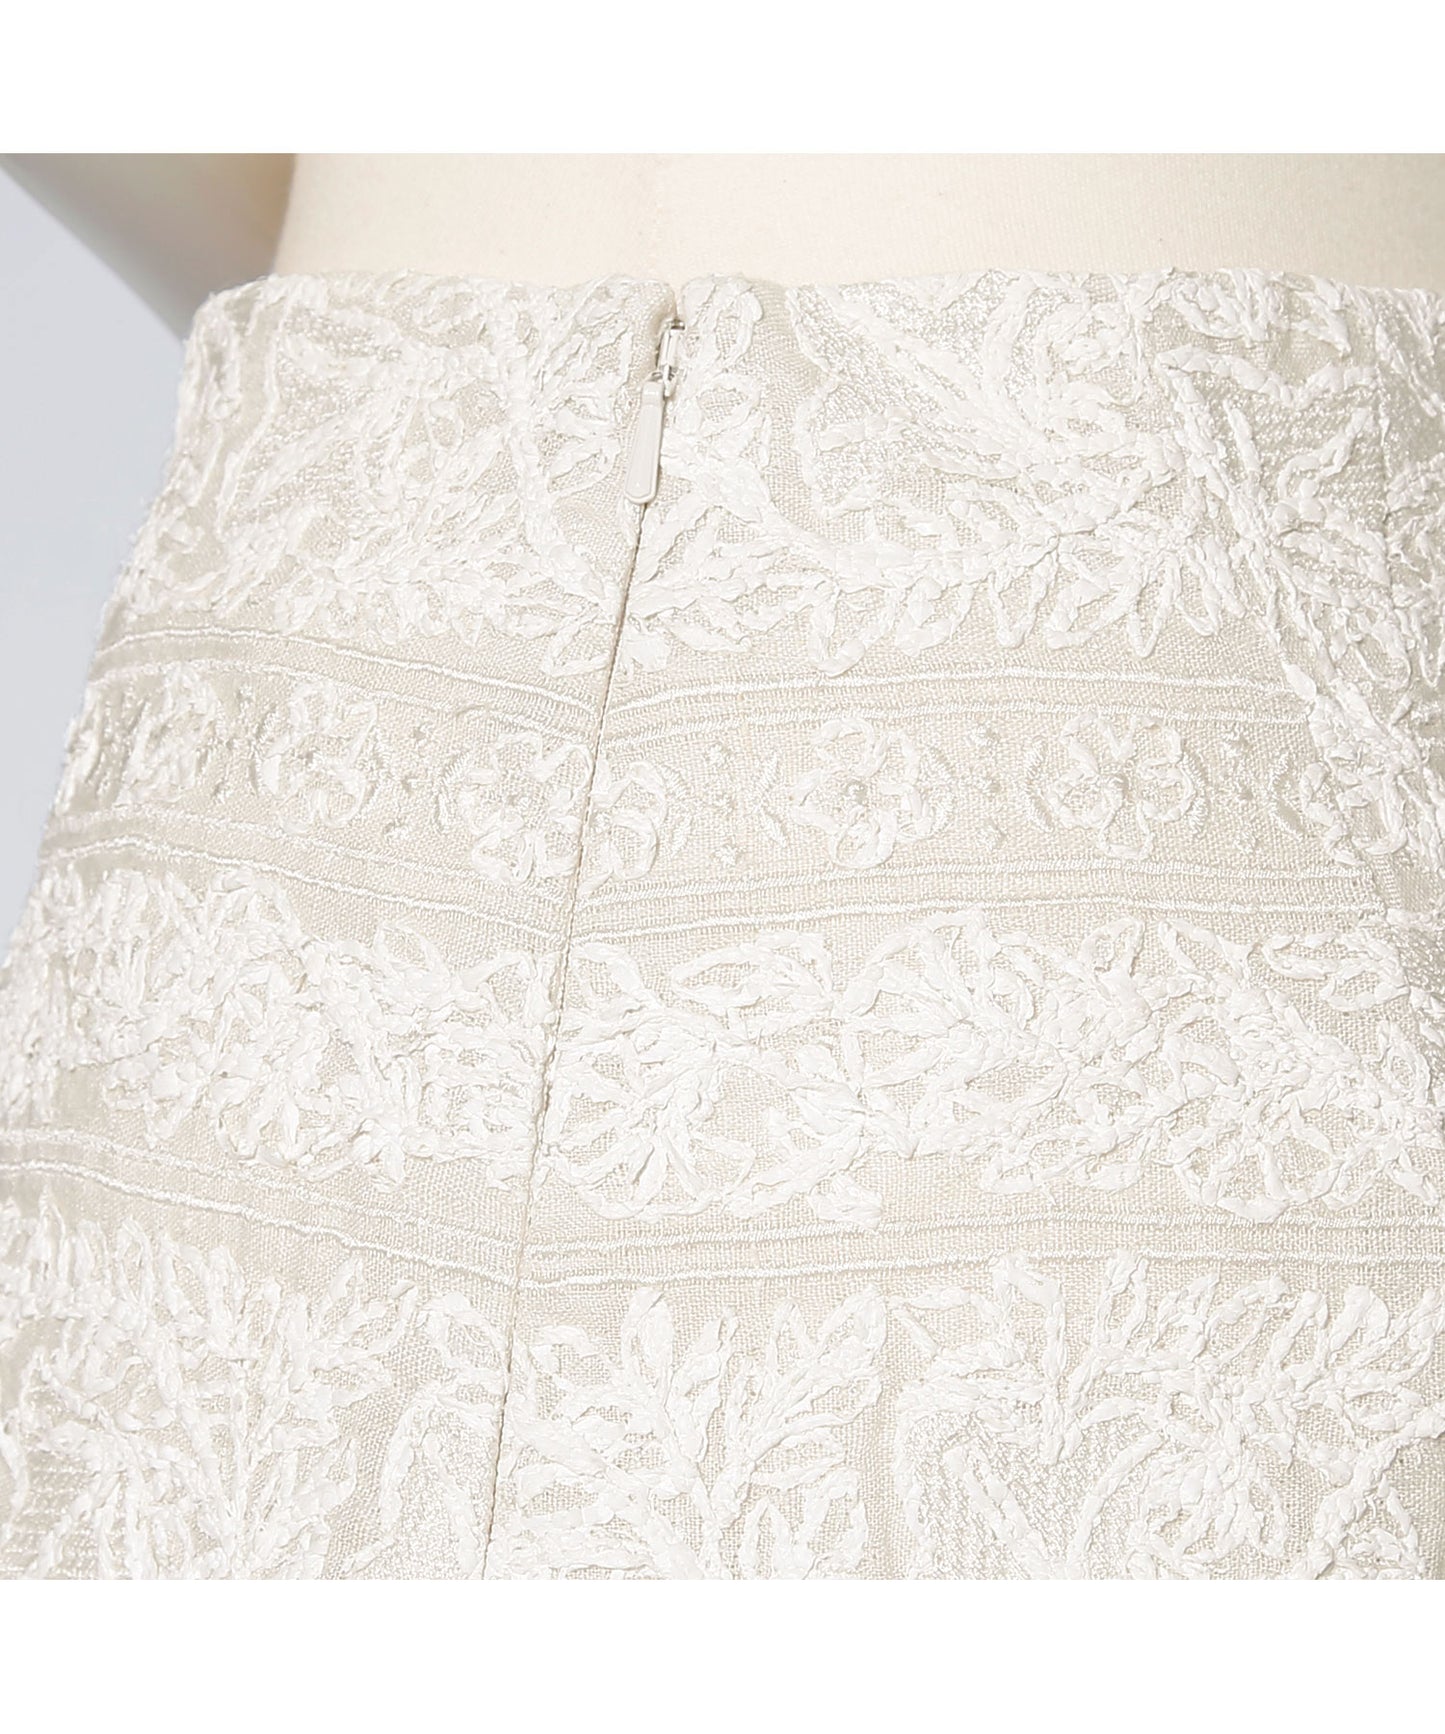 Rubber Embroidery Gathers Skirt